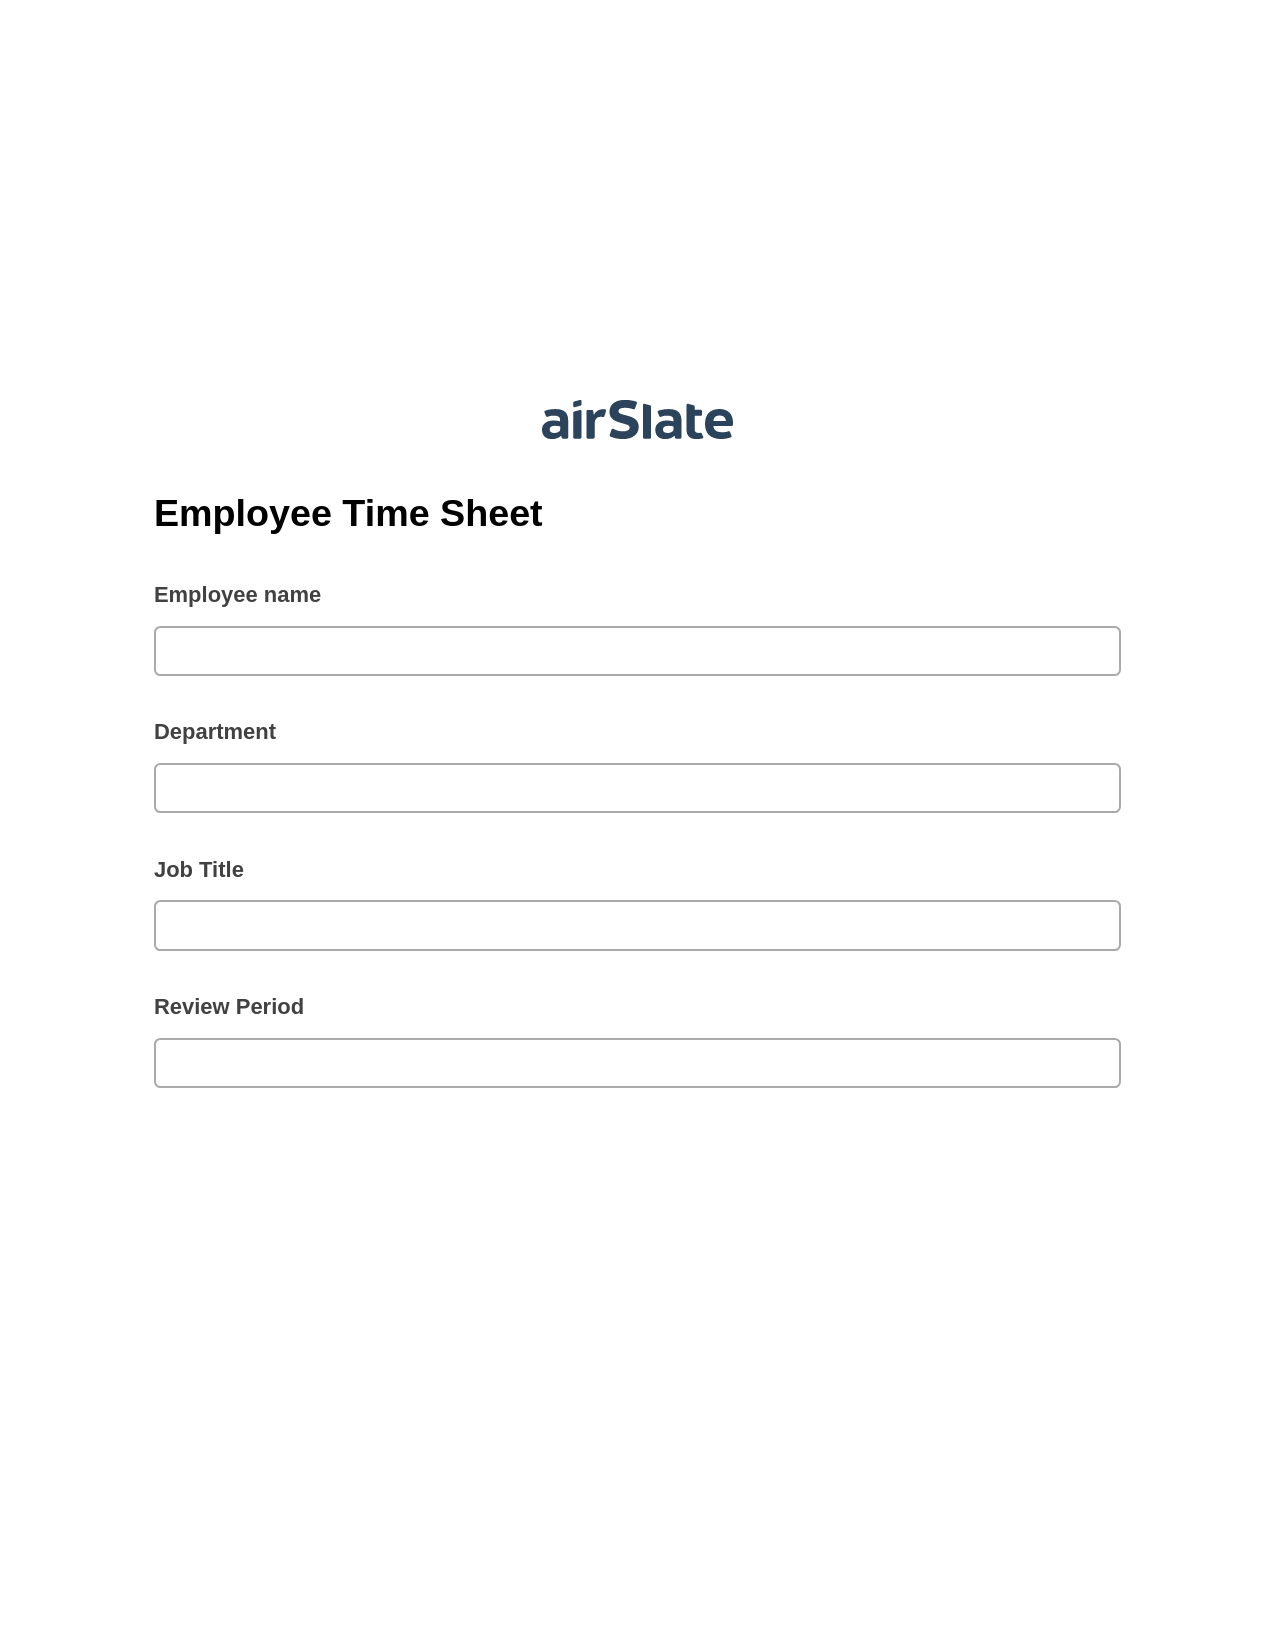 Employee Time Sheet Pre-fill from Salesforce Records Bot, Create slate addon, Export to Google Sheet Bot